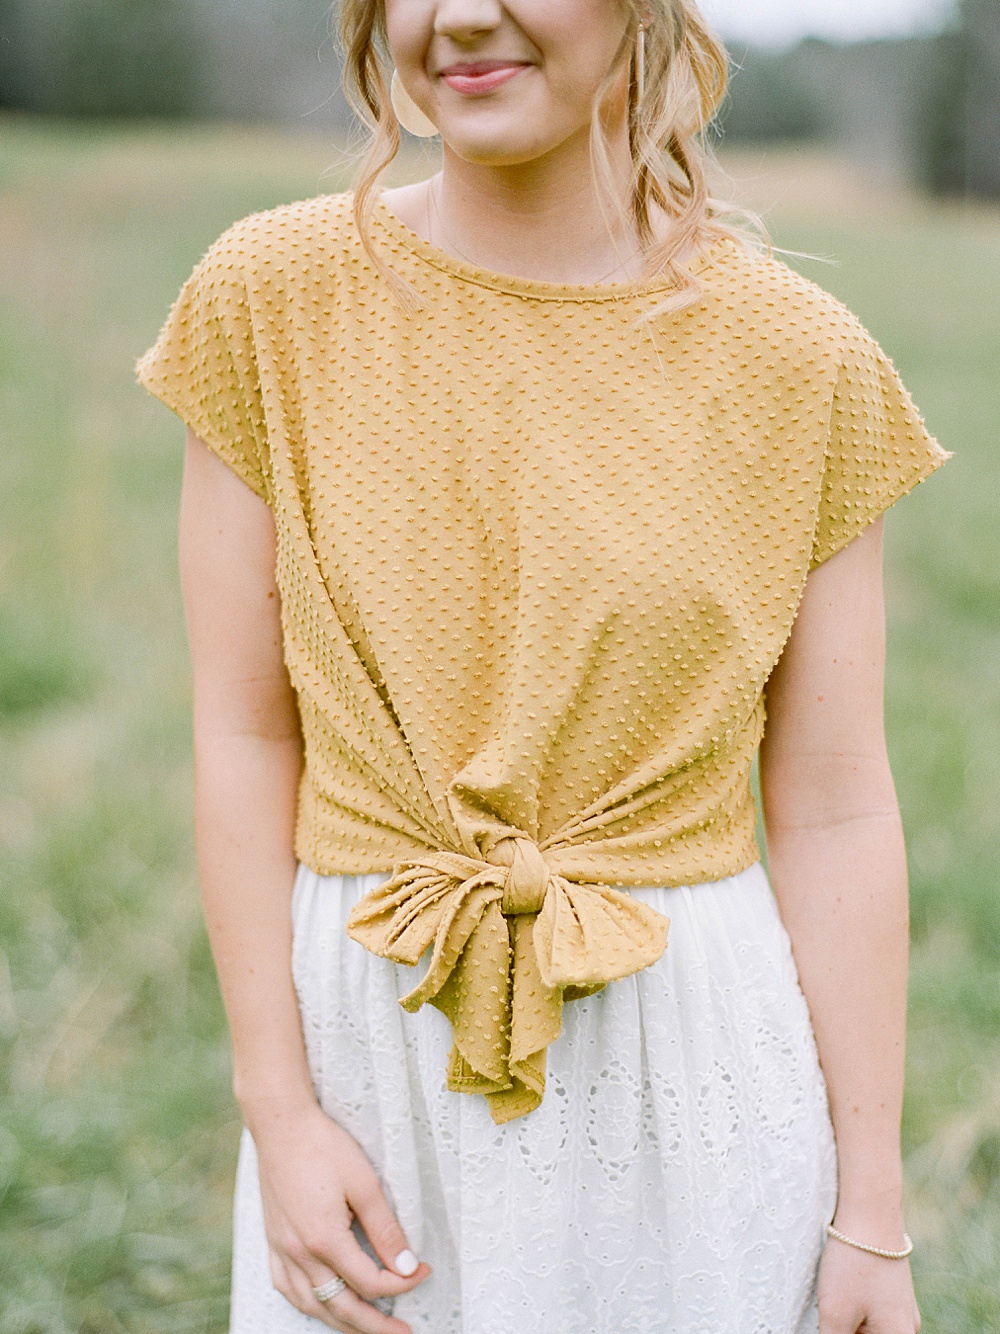 yellow polka dot shirt with a tie on the front and white skirt